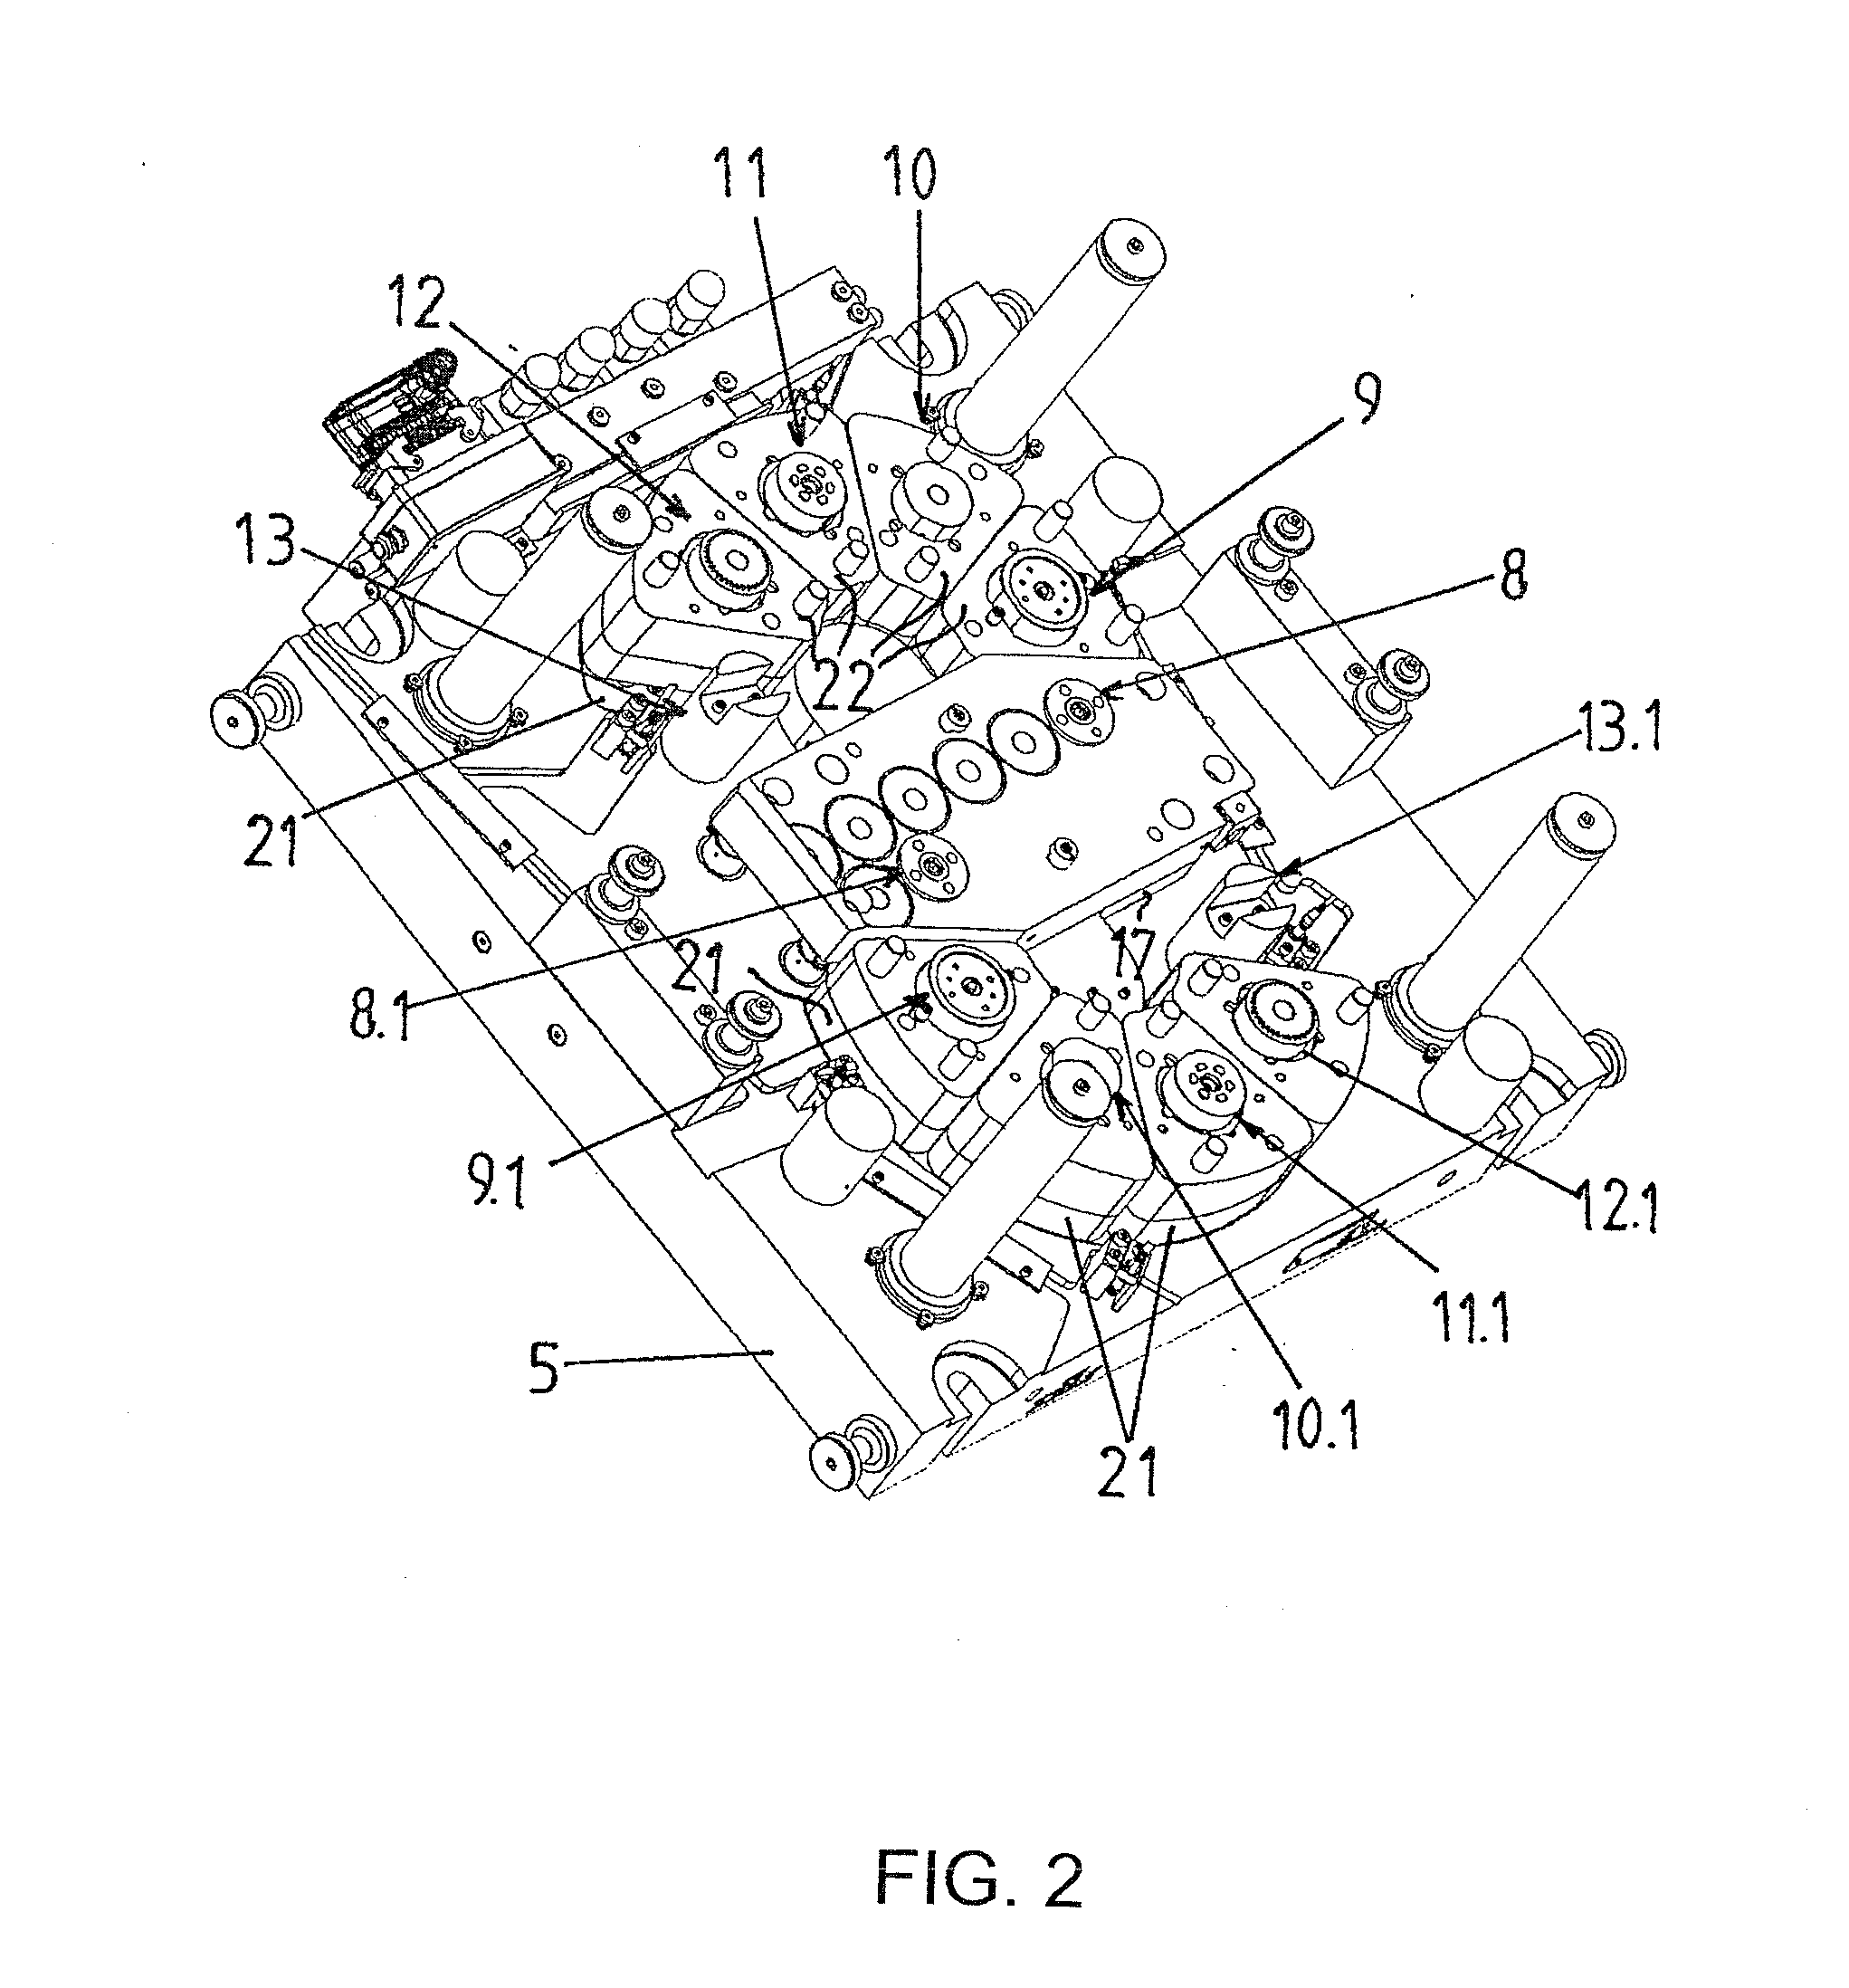 Device and method for transferring workpieces into and out of a tool